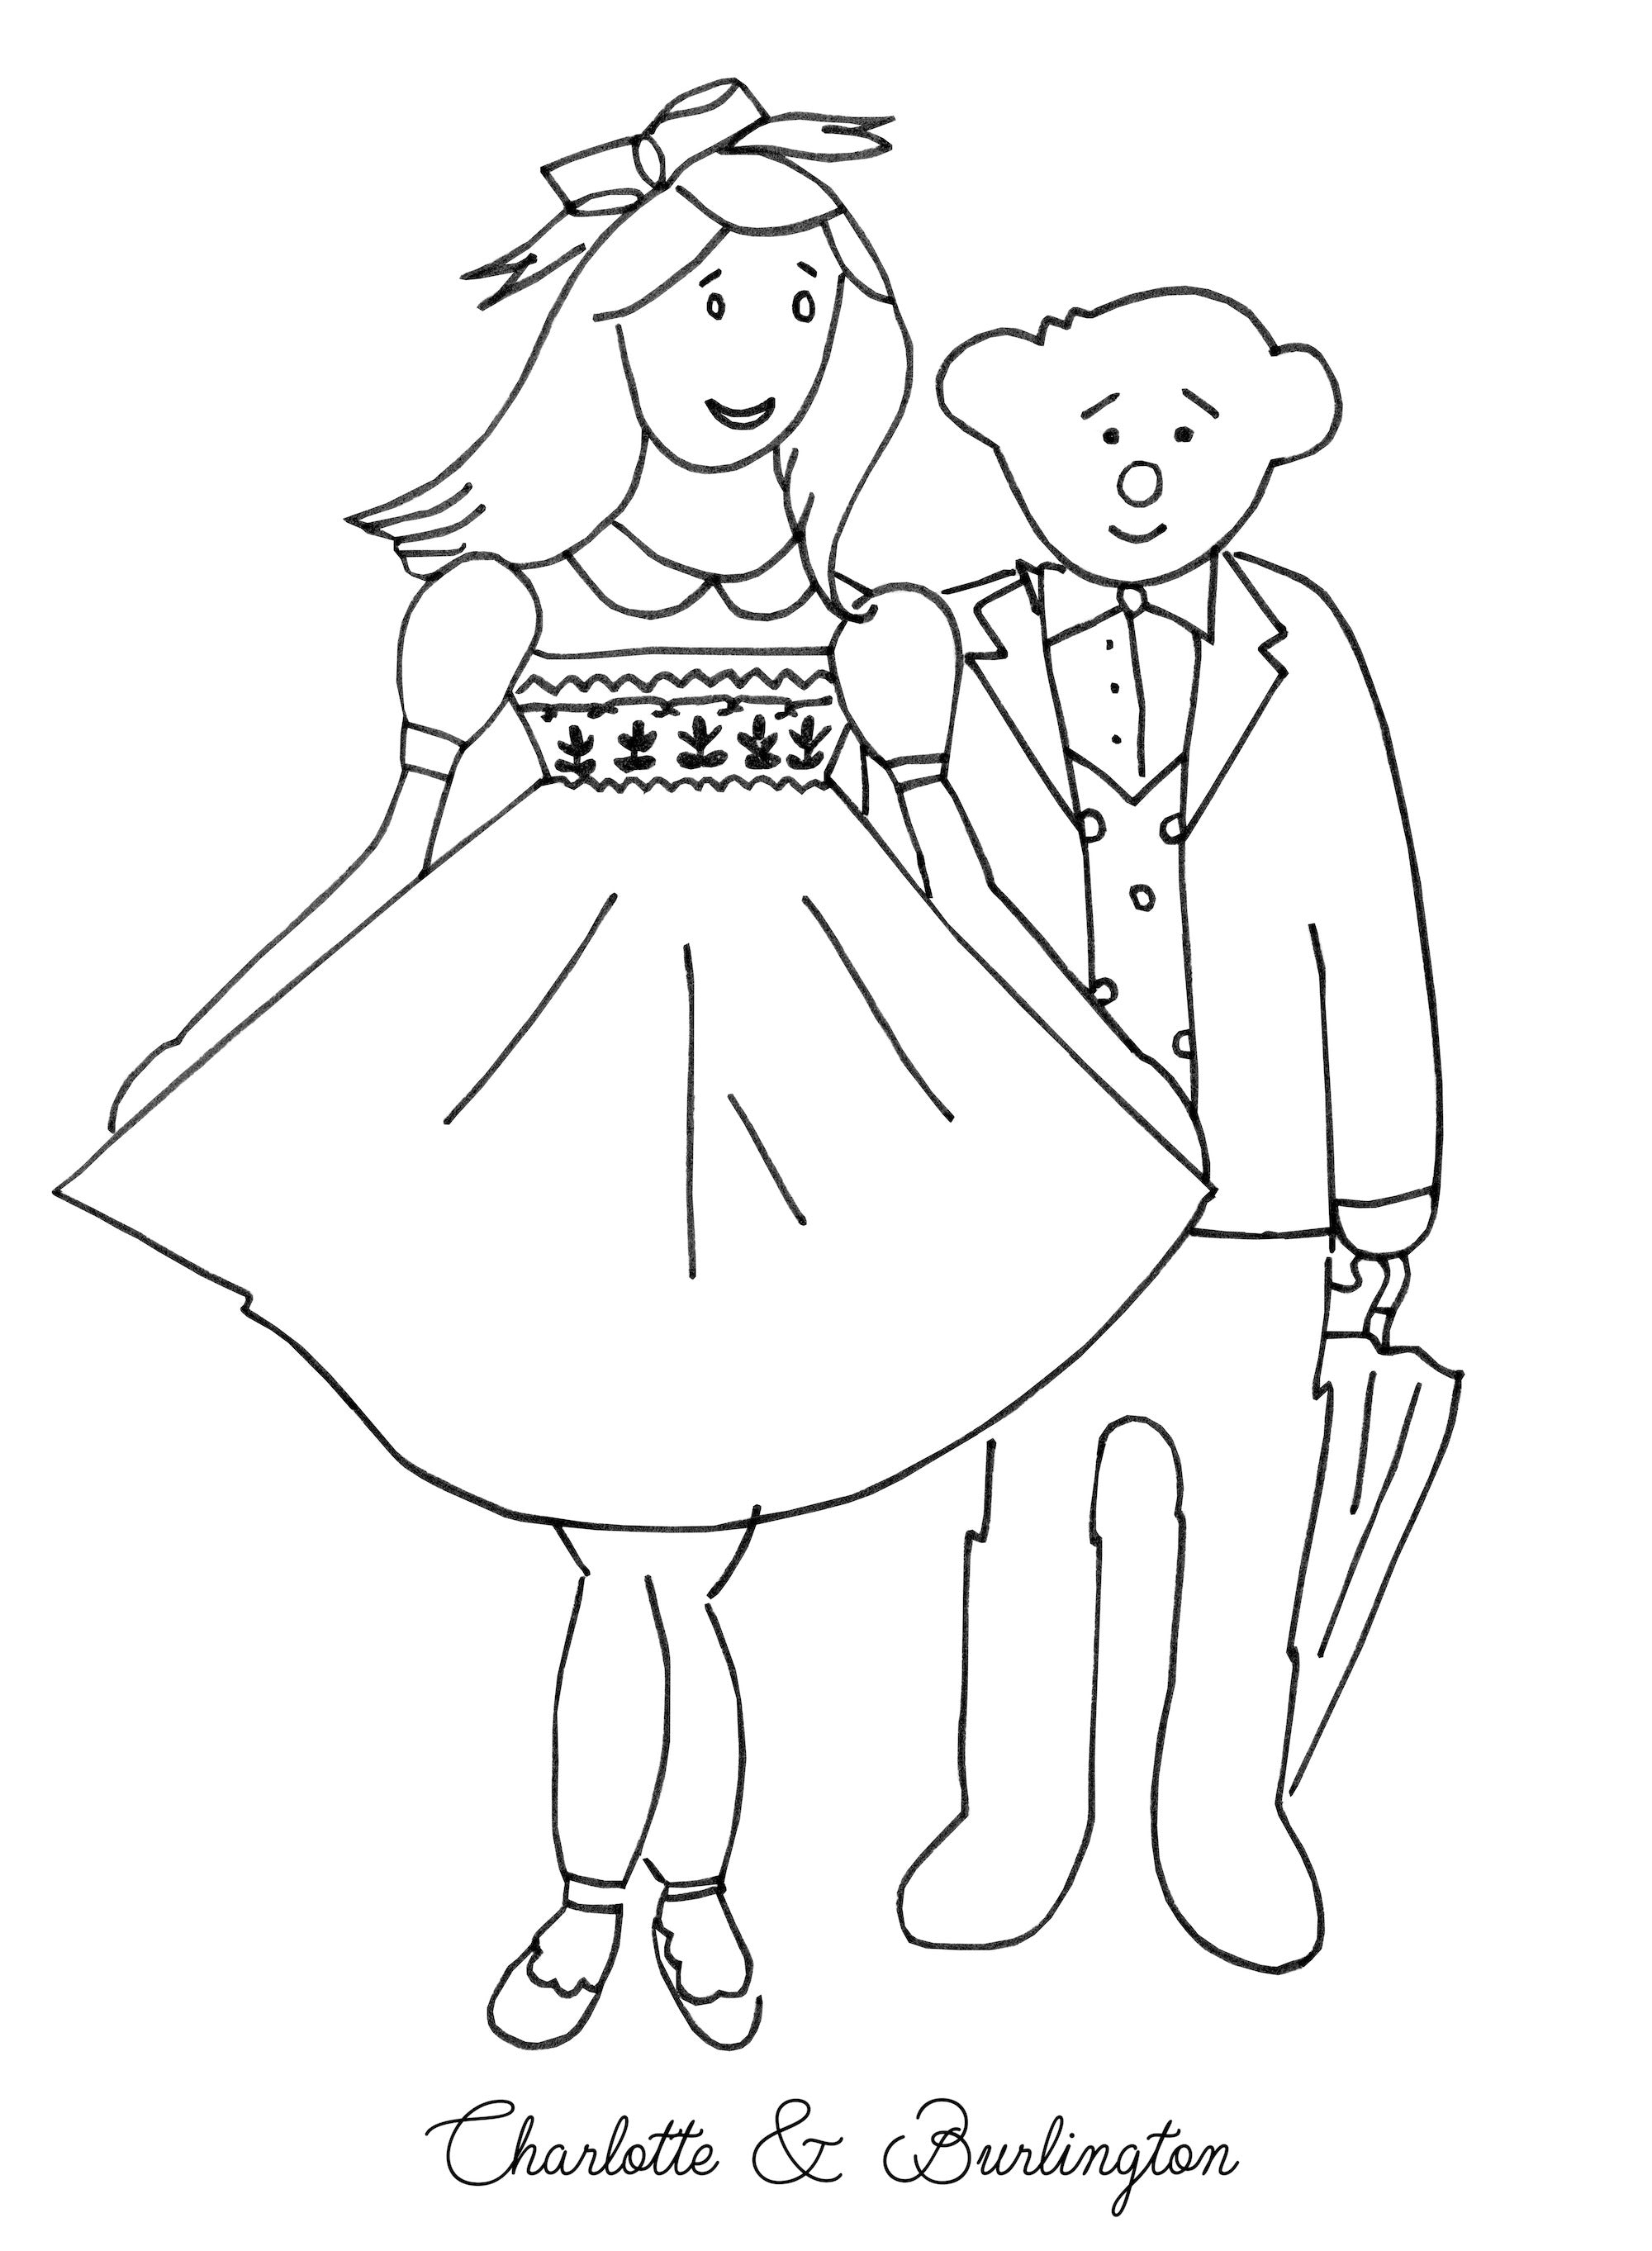 Free coloring for children Burlintgton bear and Charlotte